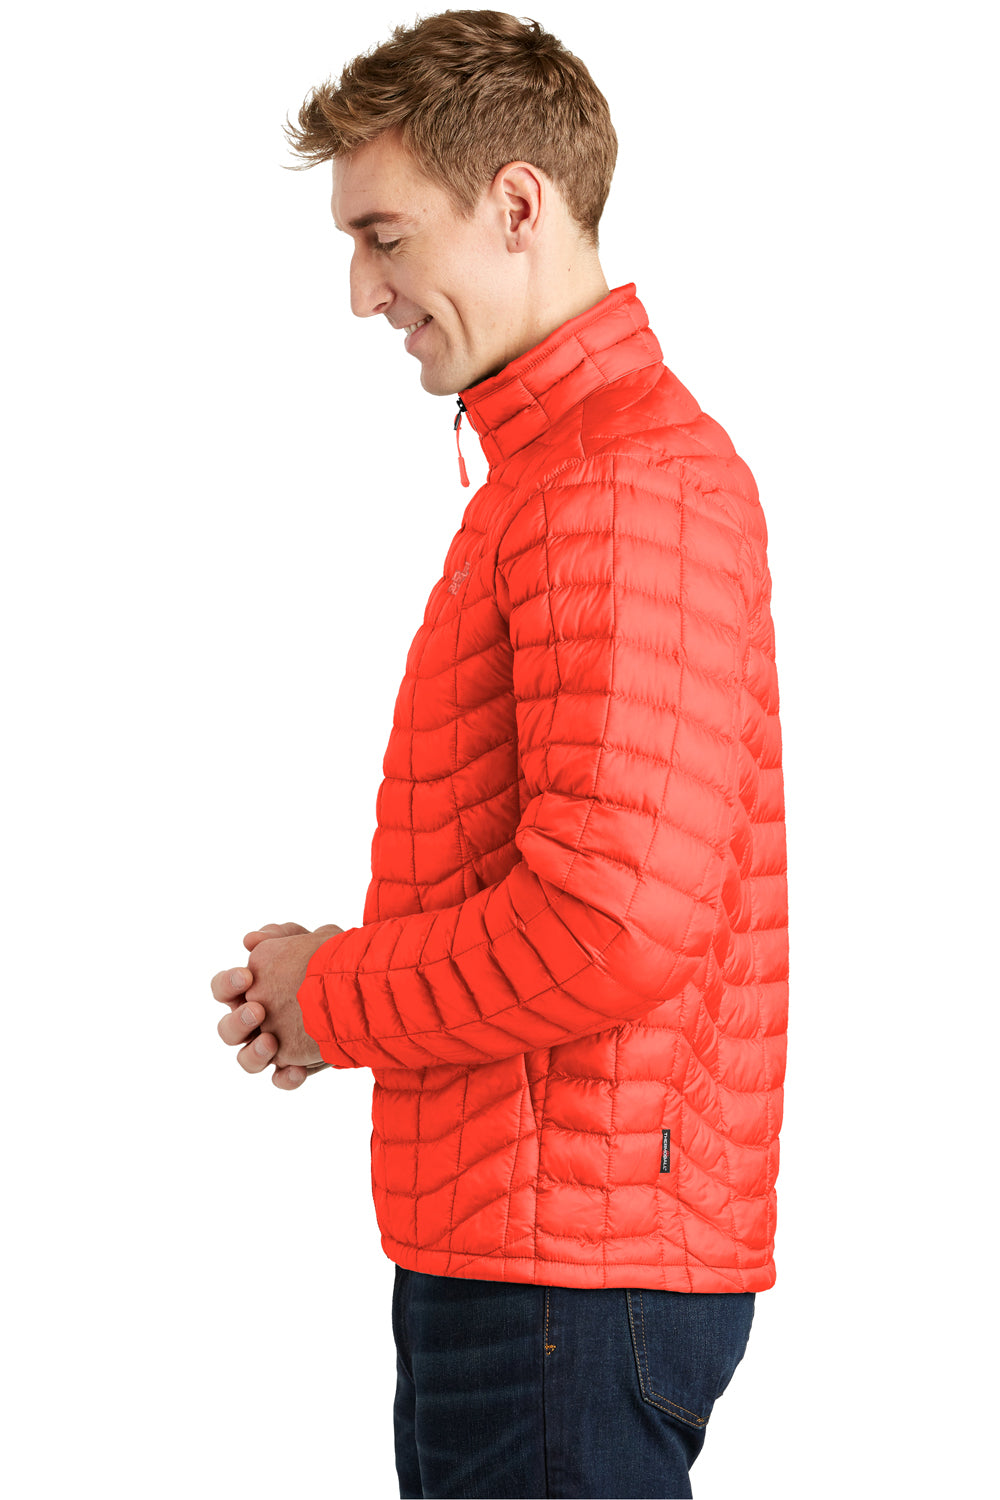 The North Face NF0A3LH2 Mens ThermoBall Trekker Water Resistant Full Zip Jacket Brick Red Side